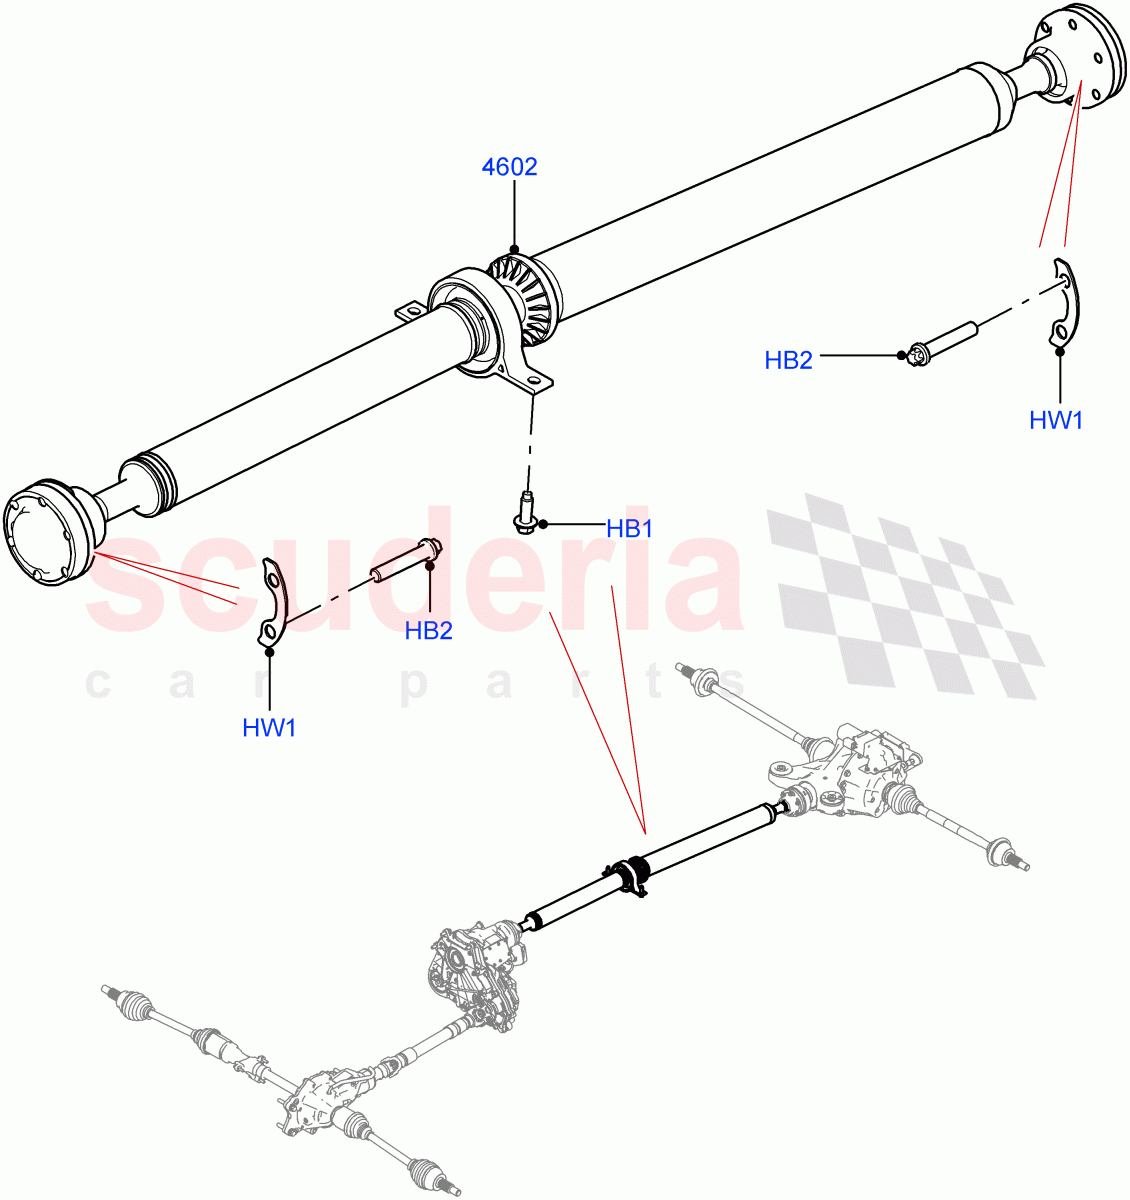 Drive Shaft - Rear Axle Drive(Propshaft) of Land Rover Land Rover Range Rover Velar (2017+) [2.0 Turbo Diesel]